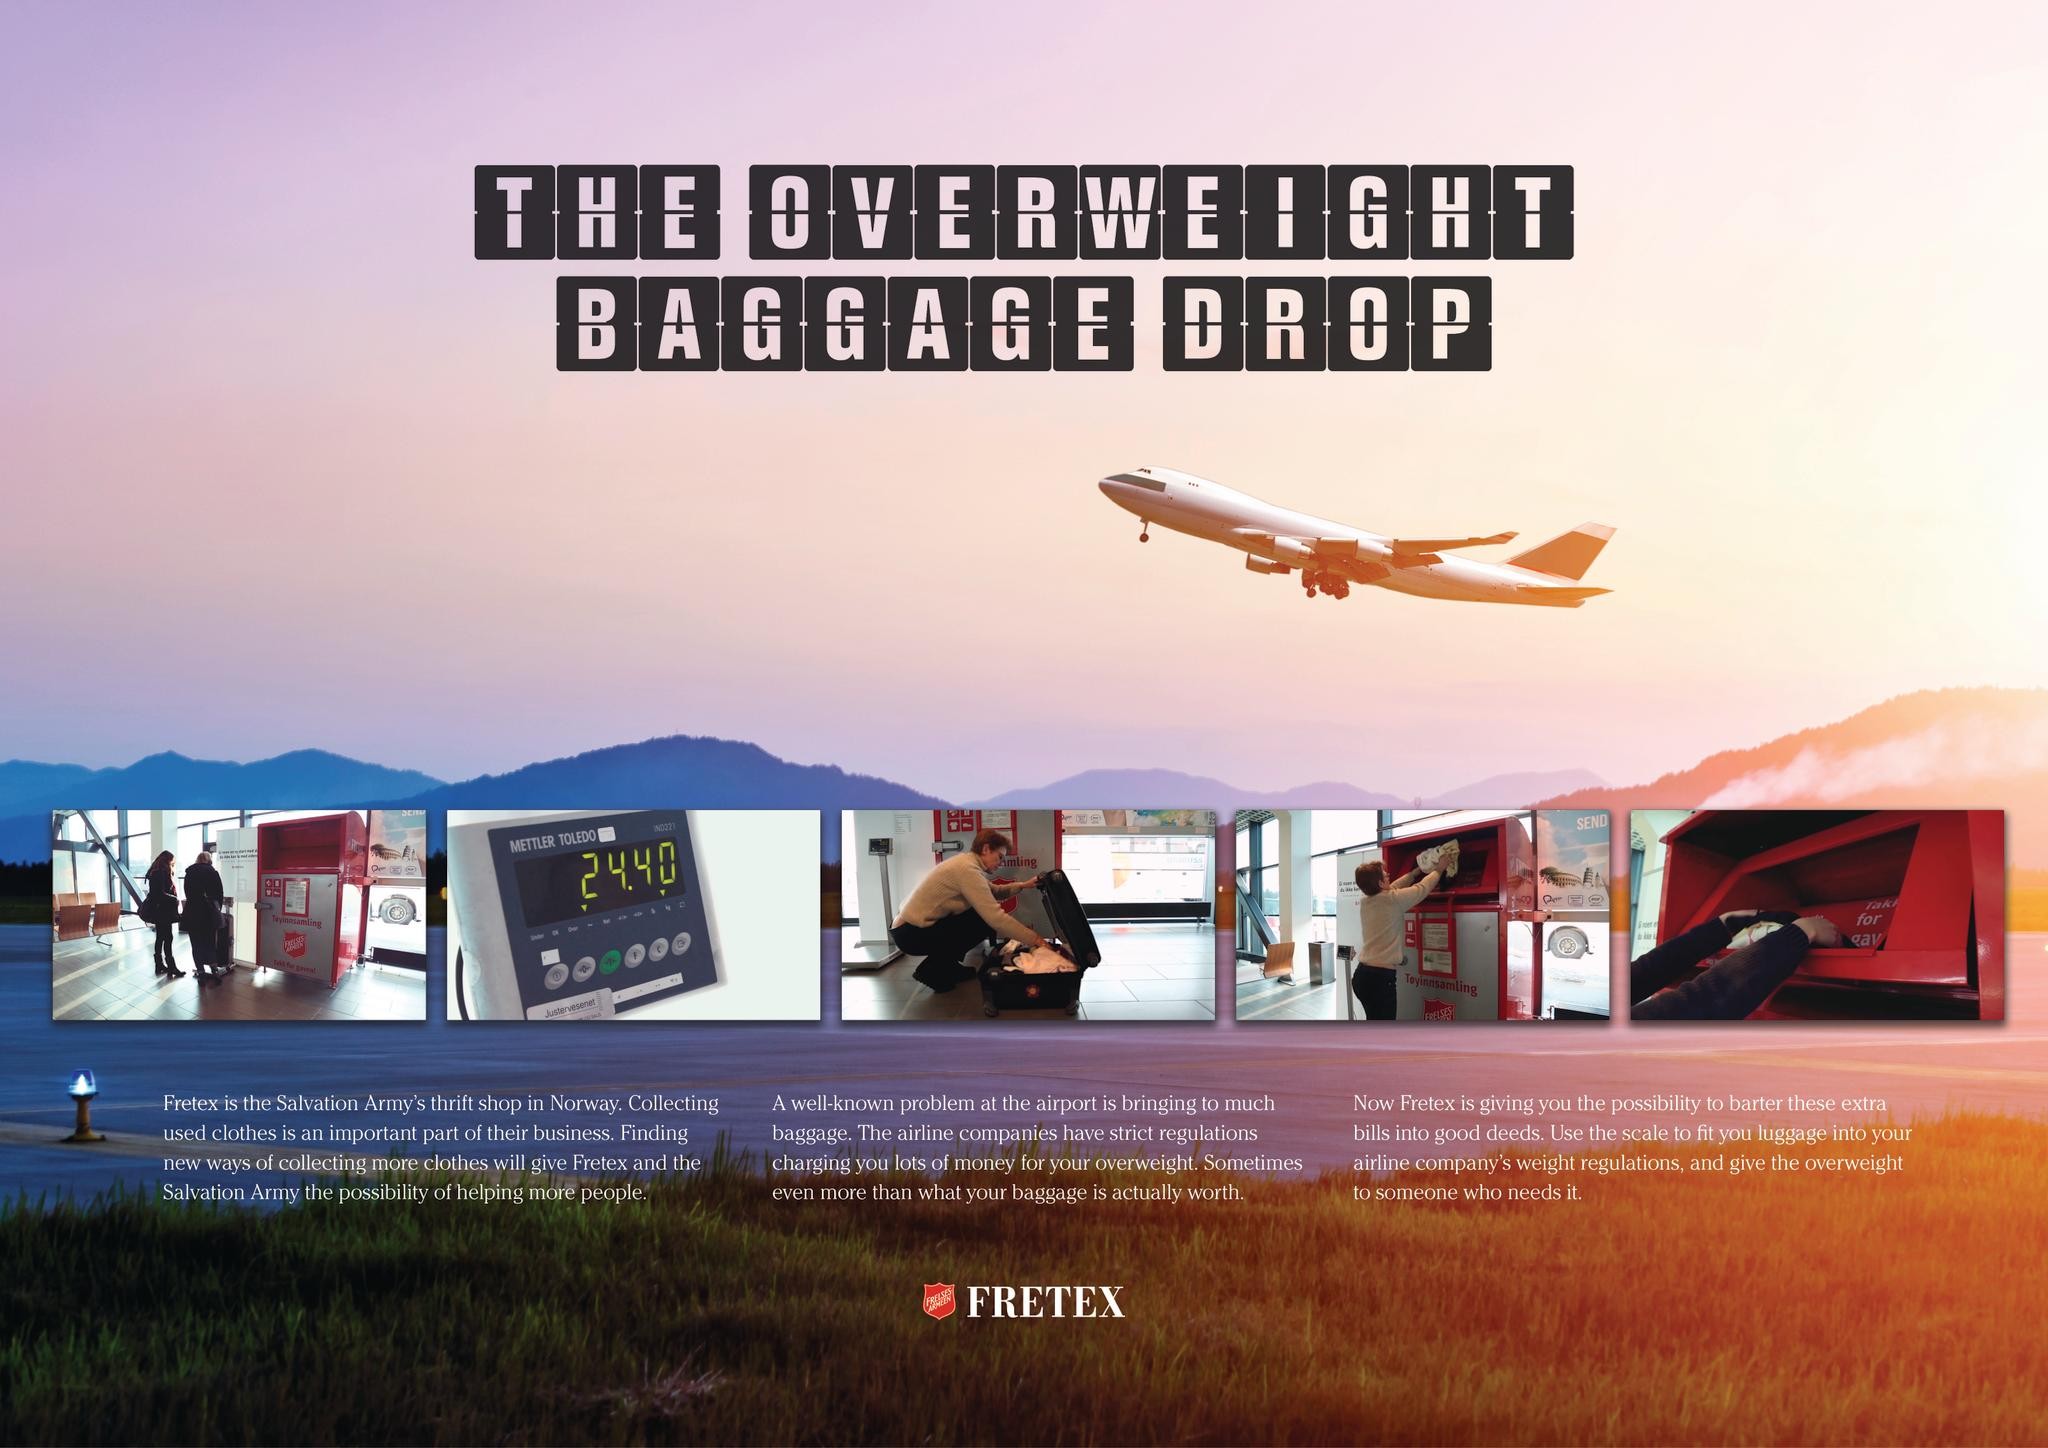 THE OVERWEIGHT BAGGAGE DROP